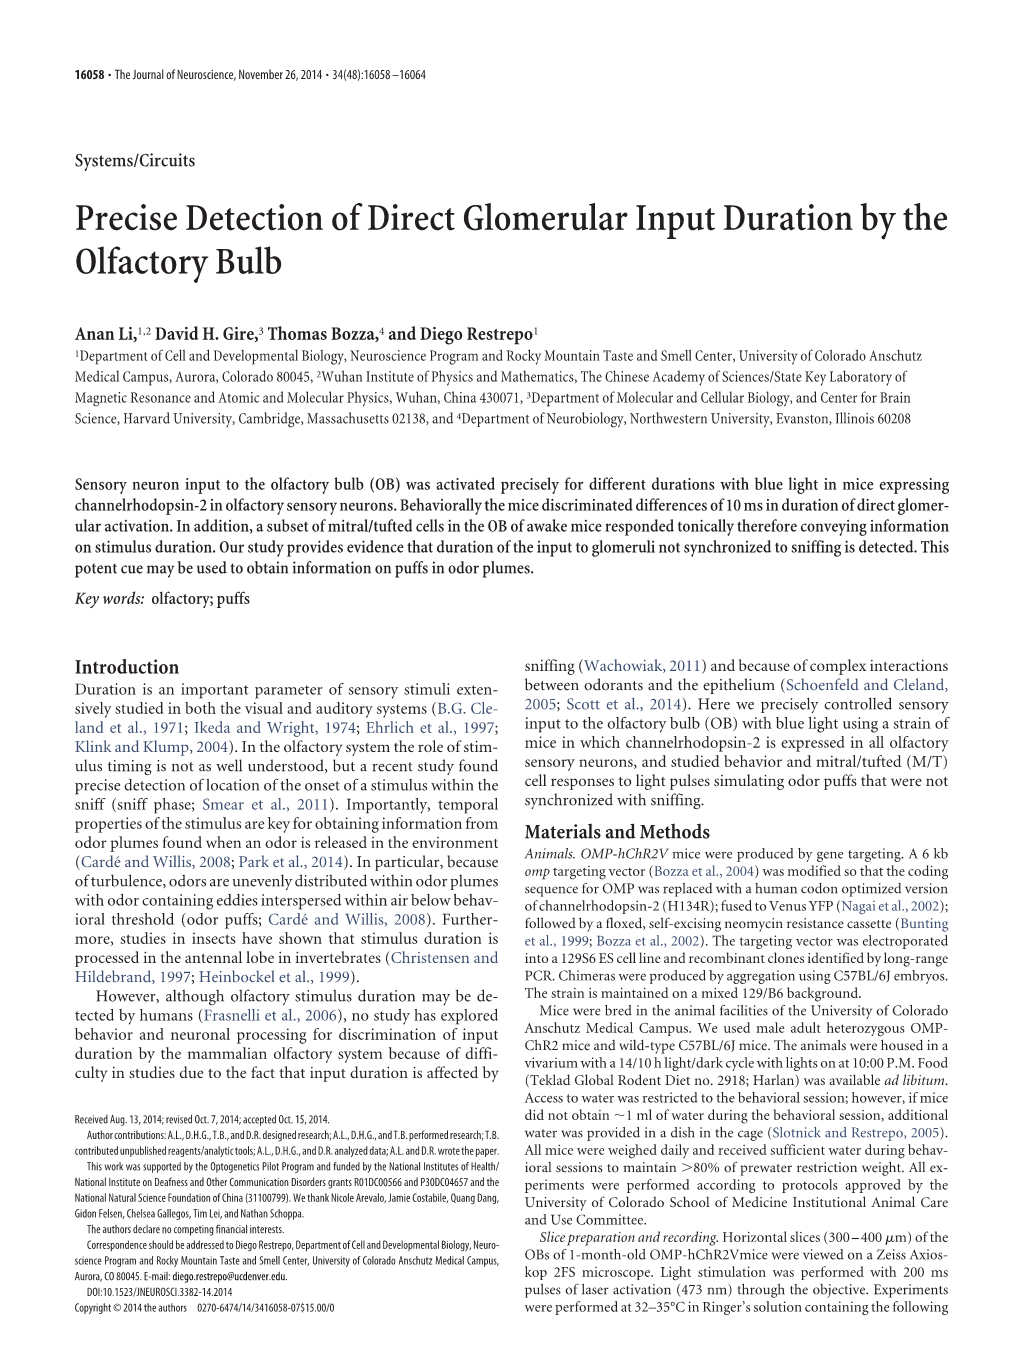 Precise Detection of Direct Glomerular Input Duration by the Olfactory Bulb